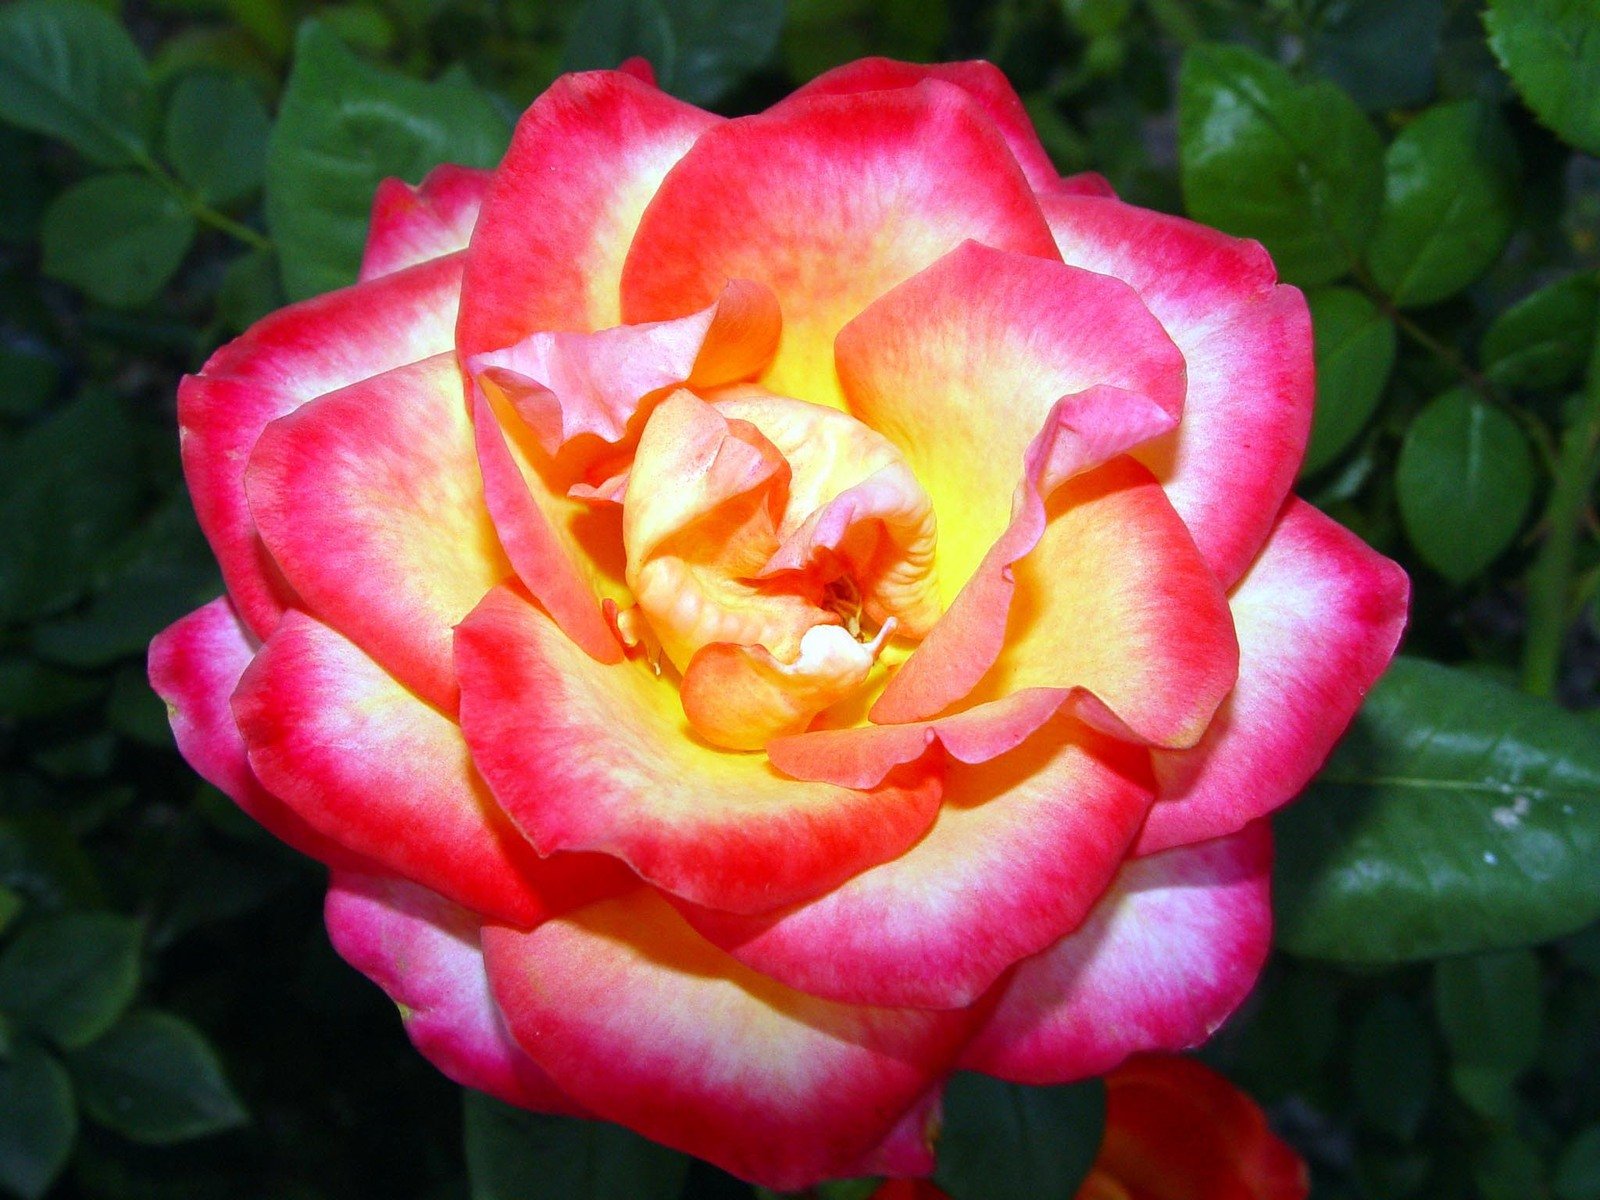 red and yellow rose with some green leaves